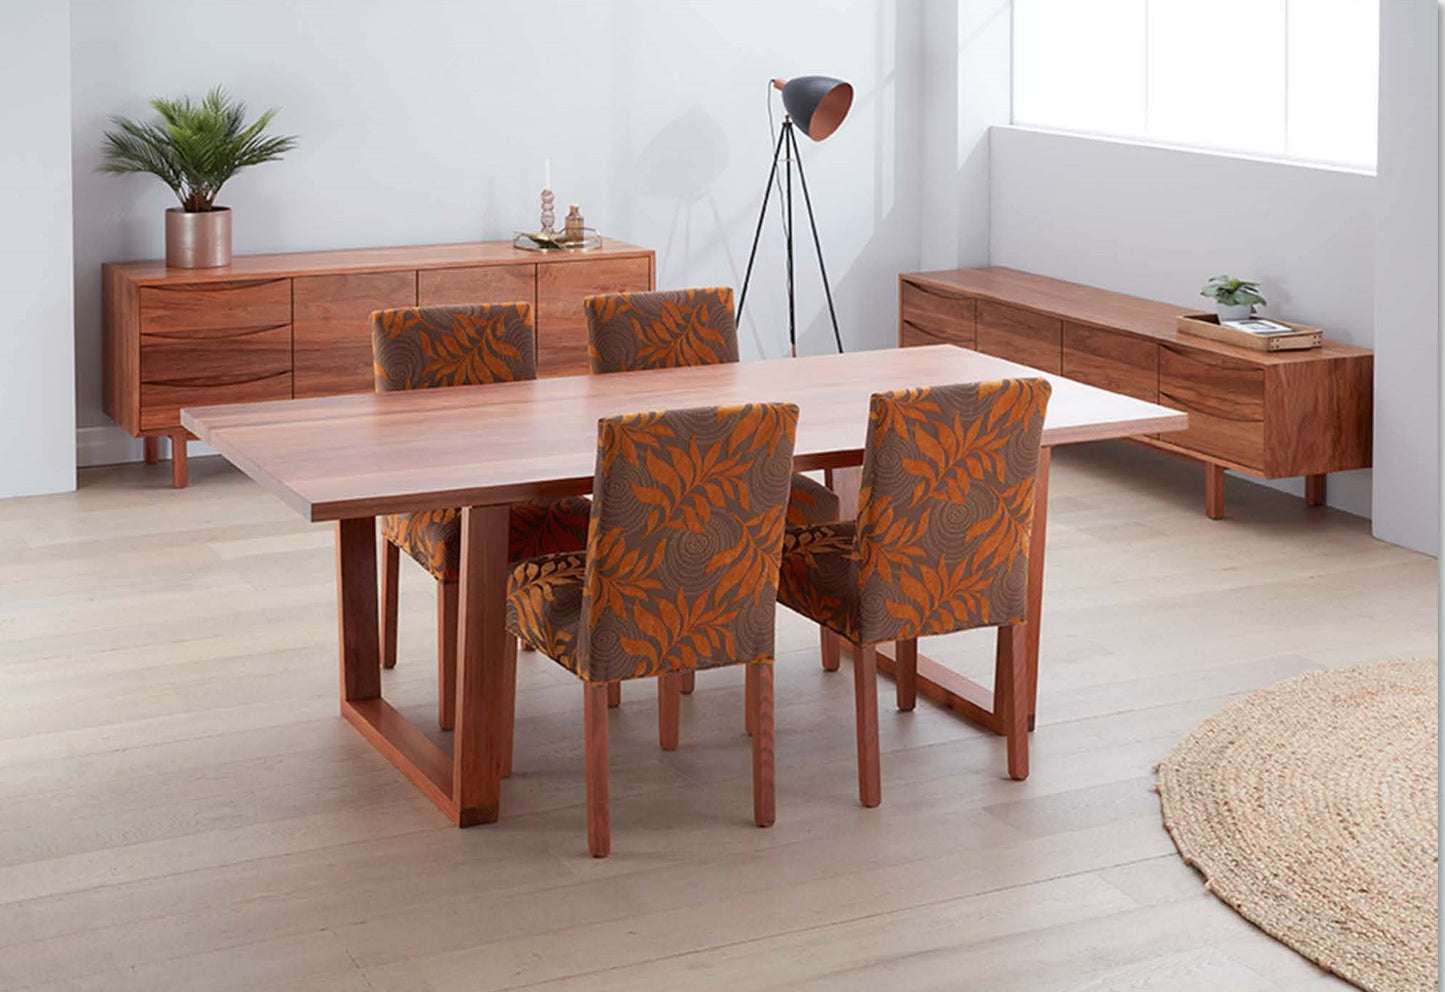 Waratah Dining Table in solid Tasmanian Blackwood or Tas Oak available at Make Your House A Home. Furniture Store Bendigo. Astra Australian Made Timber Furniture.